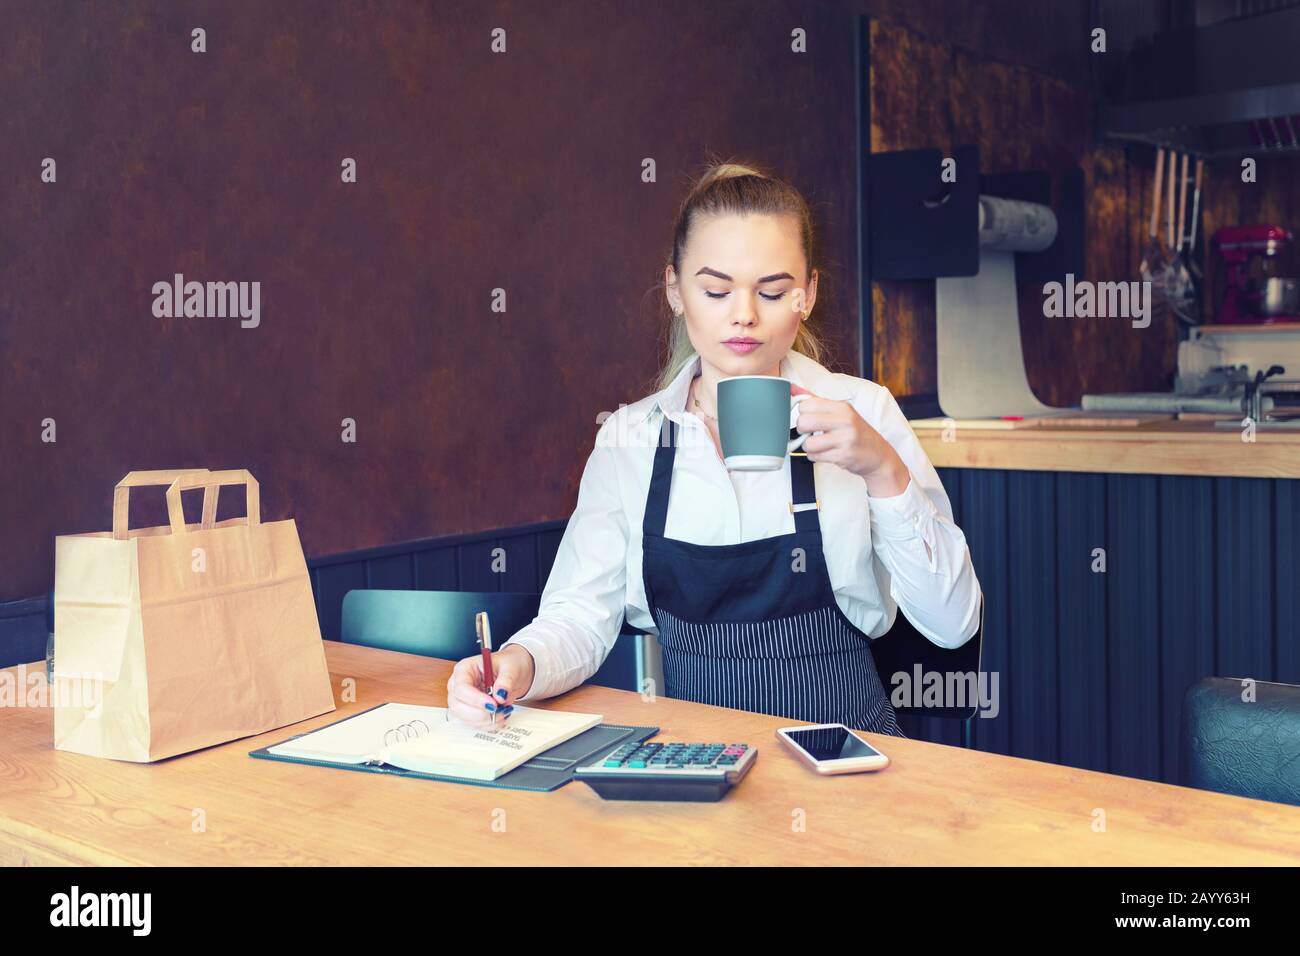 Young new small business owner calculating restaurant bills expenses and taxes Stock Photo